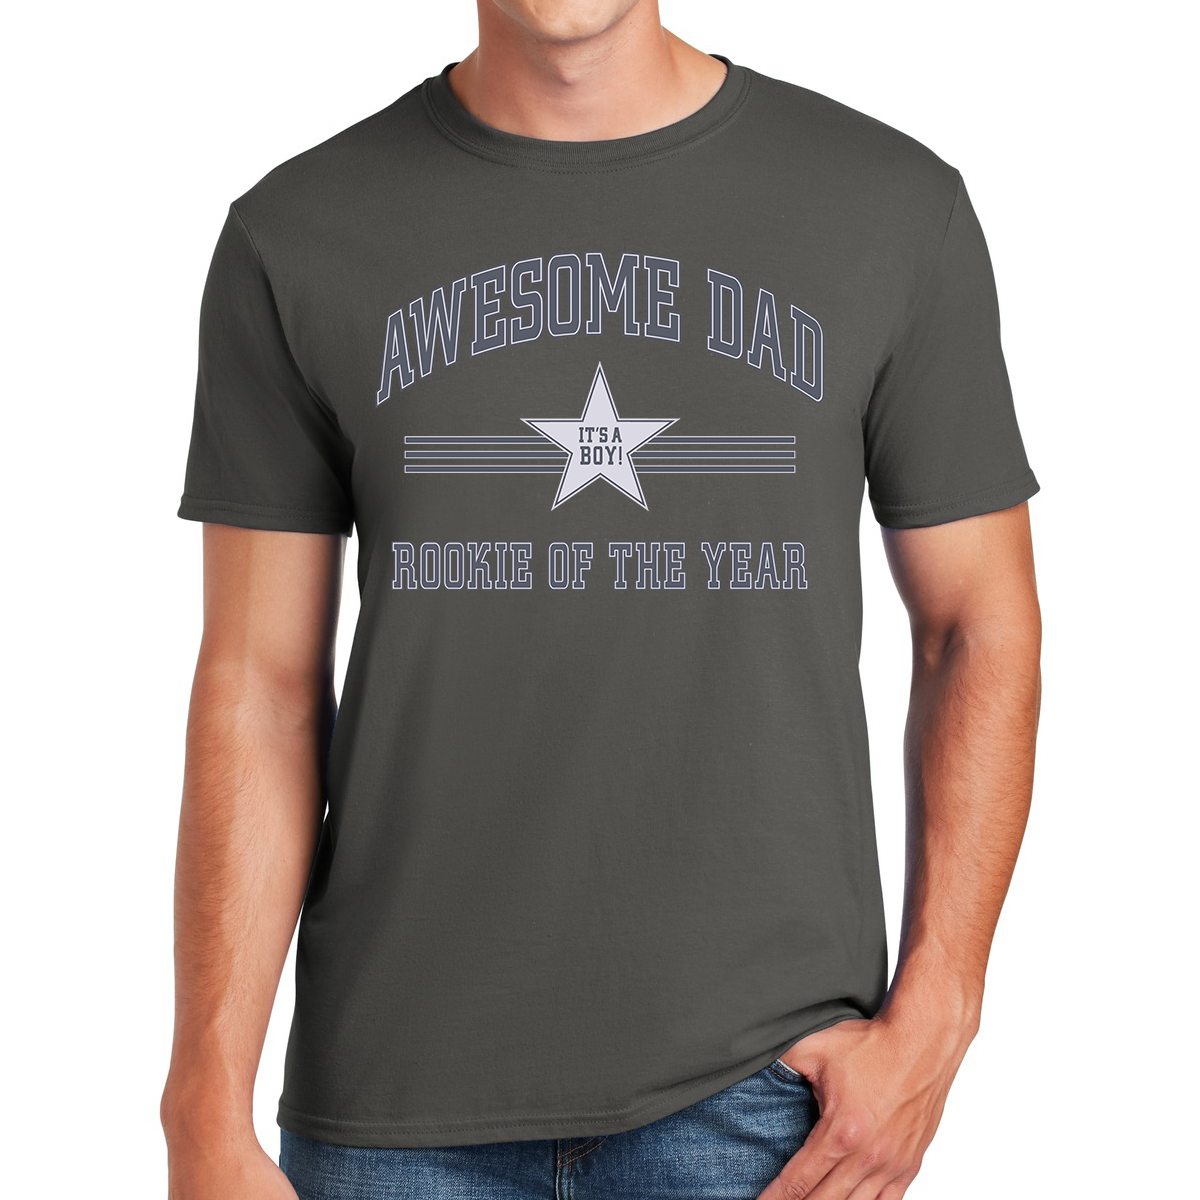 Awesome Dad Rookie Of The Year It's A Boy Welcoming Our Little MVP Gift For Dads T-shirt